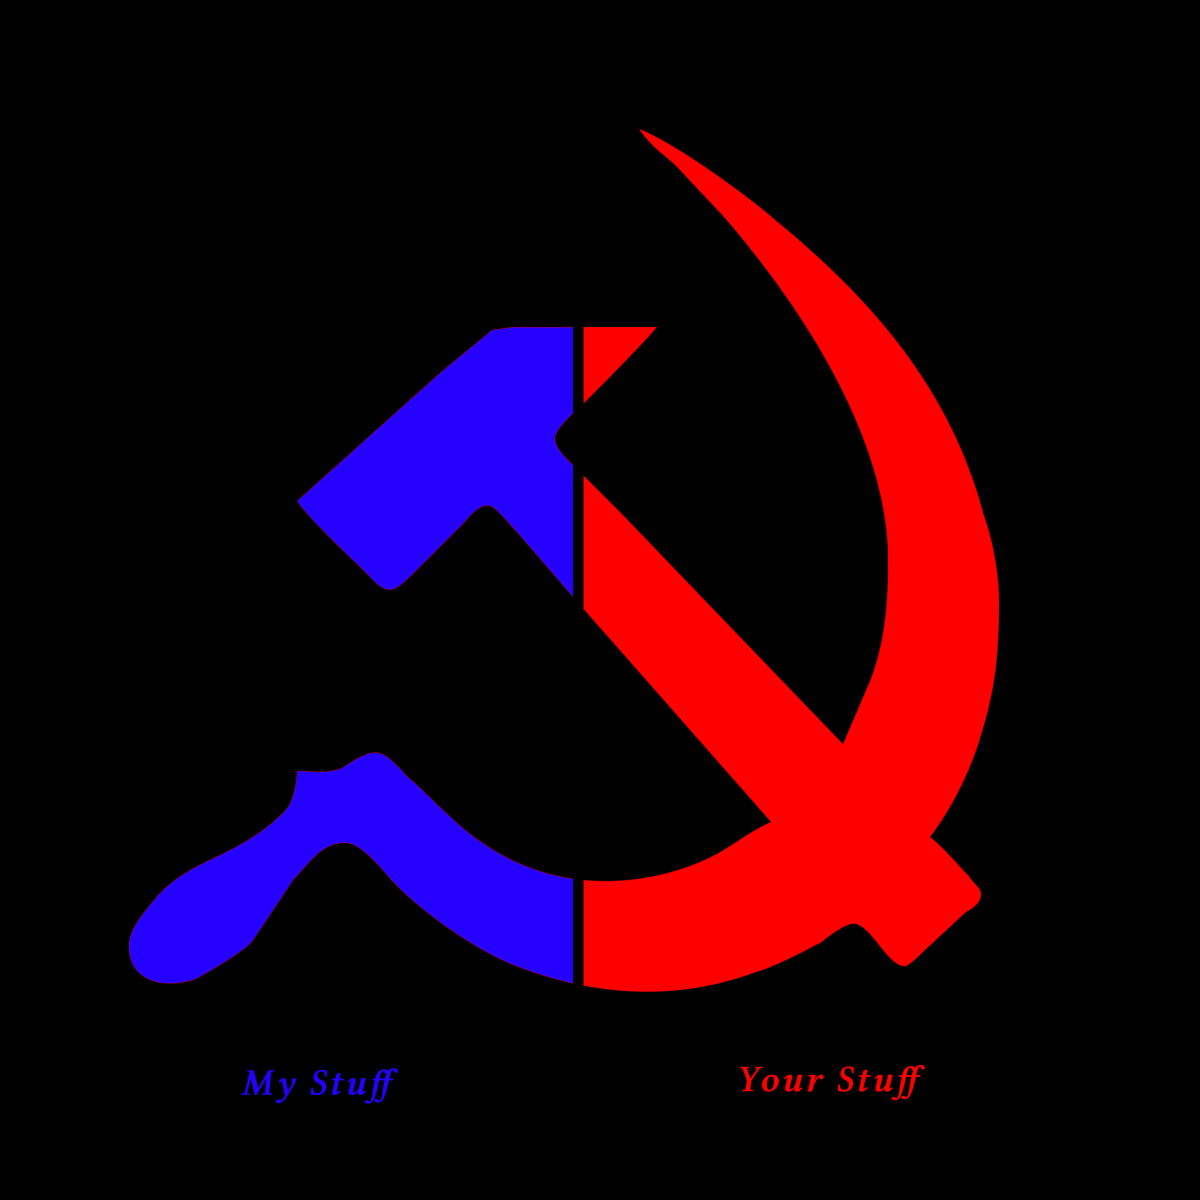 Your A Communist So Give Me Hald your Stuff